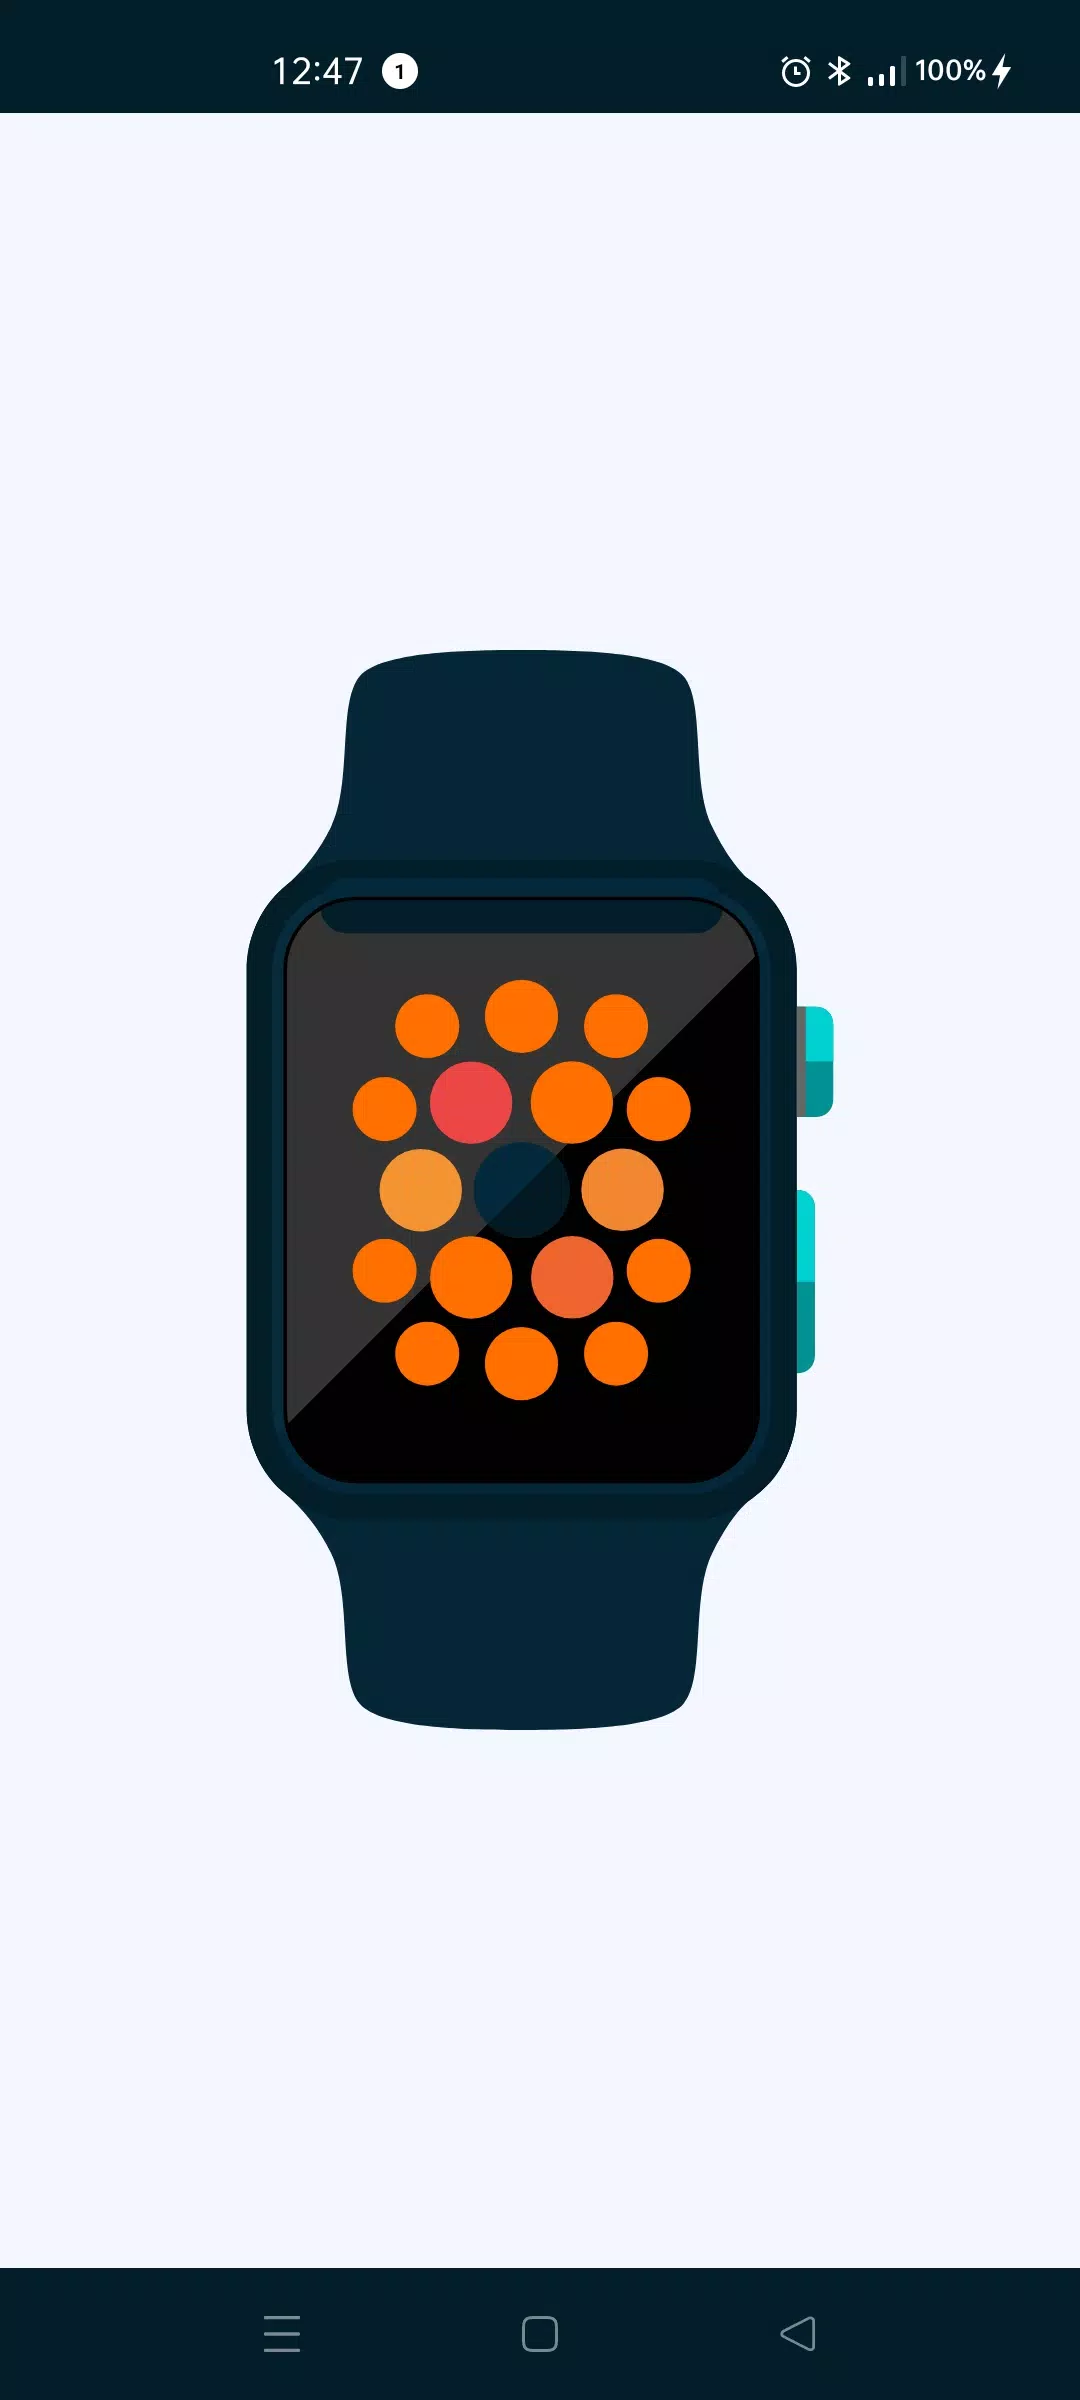 Bt Notifier - Smartwatch notice sync watch & wear for Android - APK Download